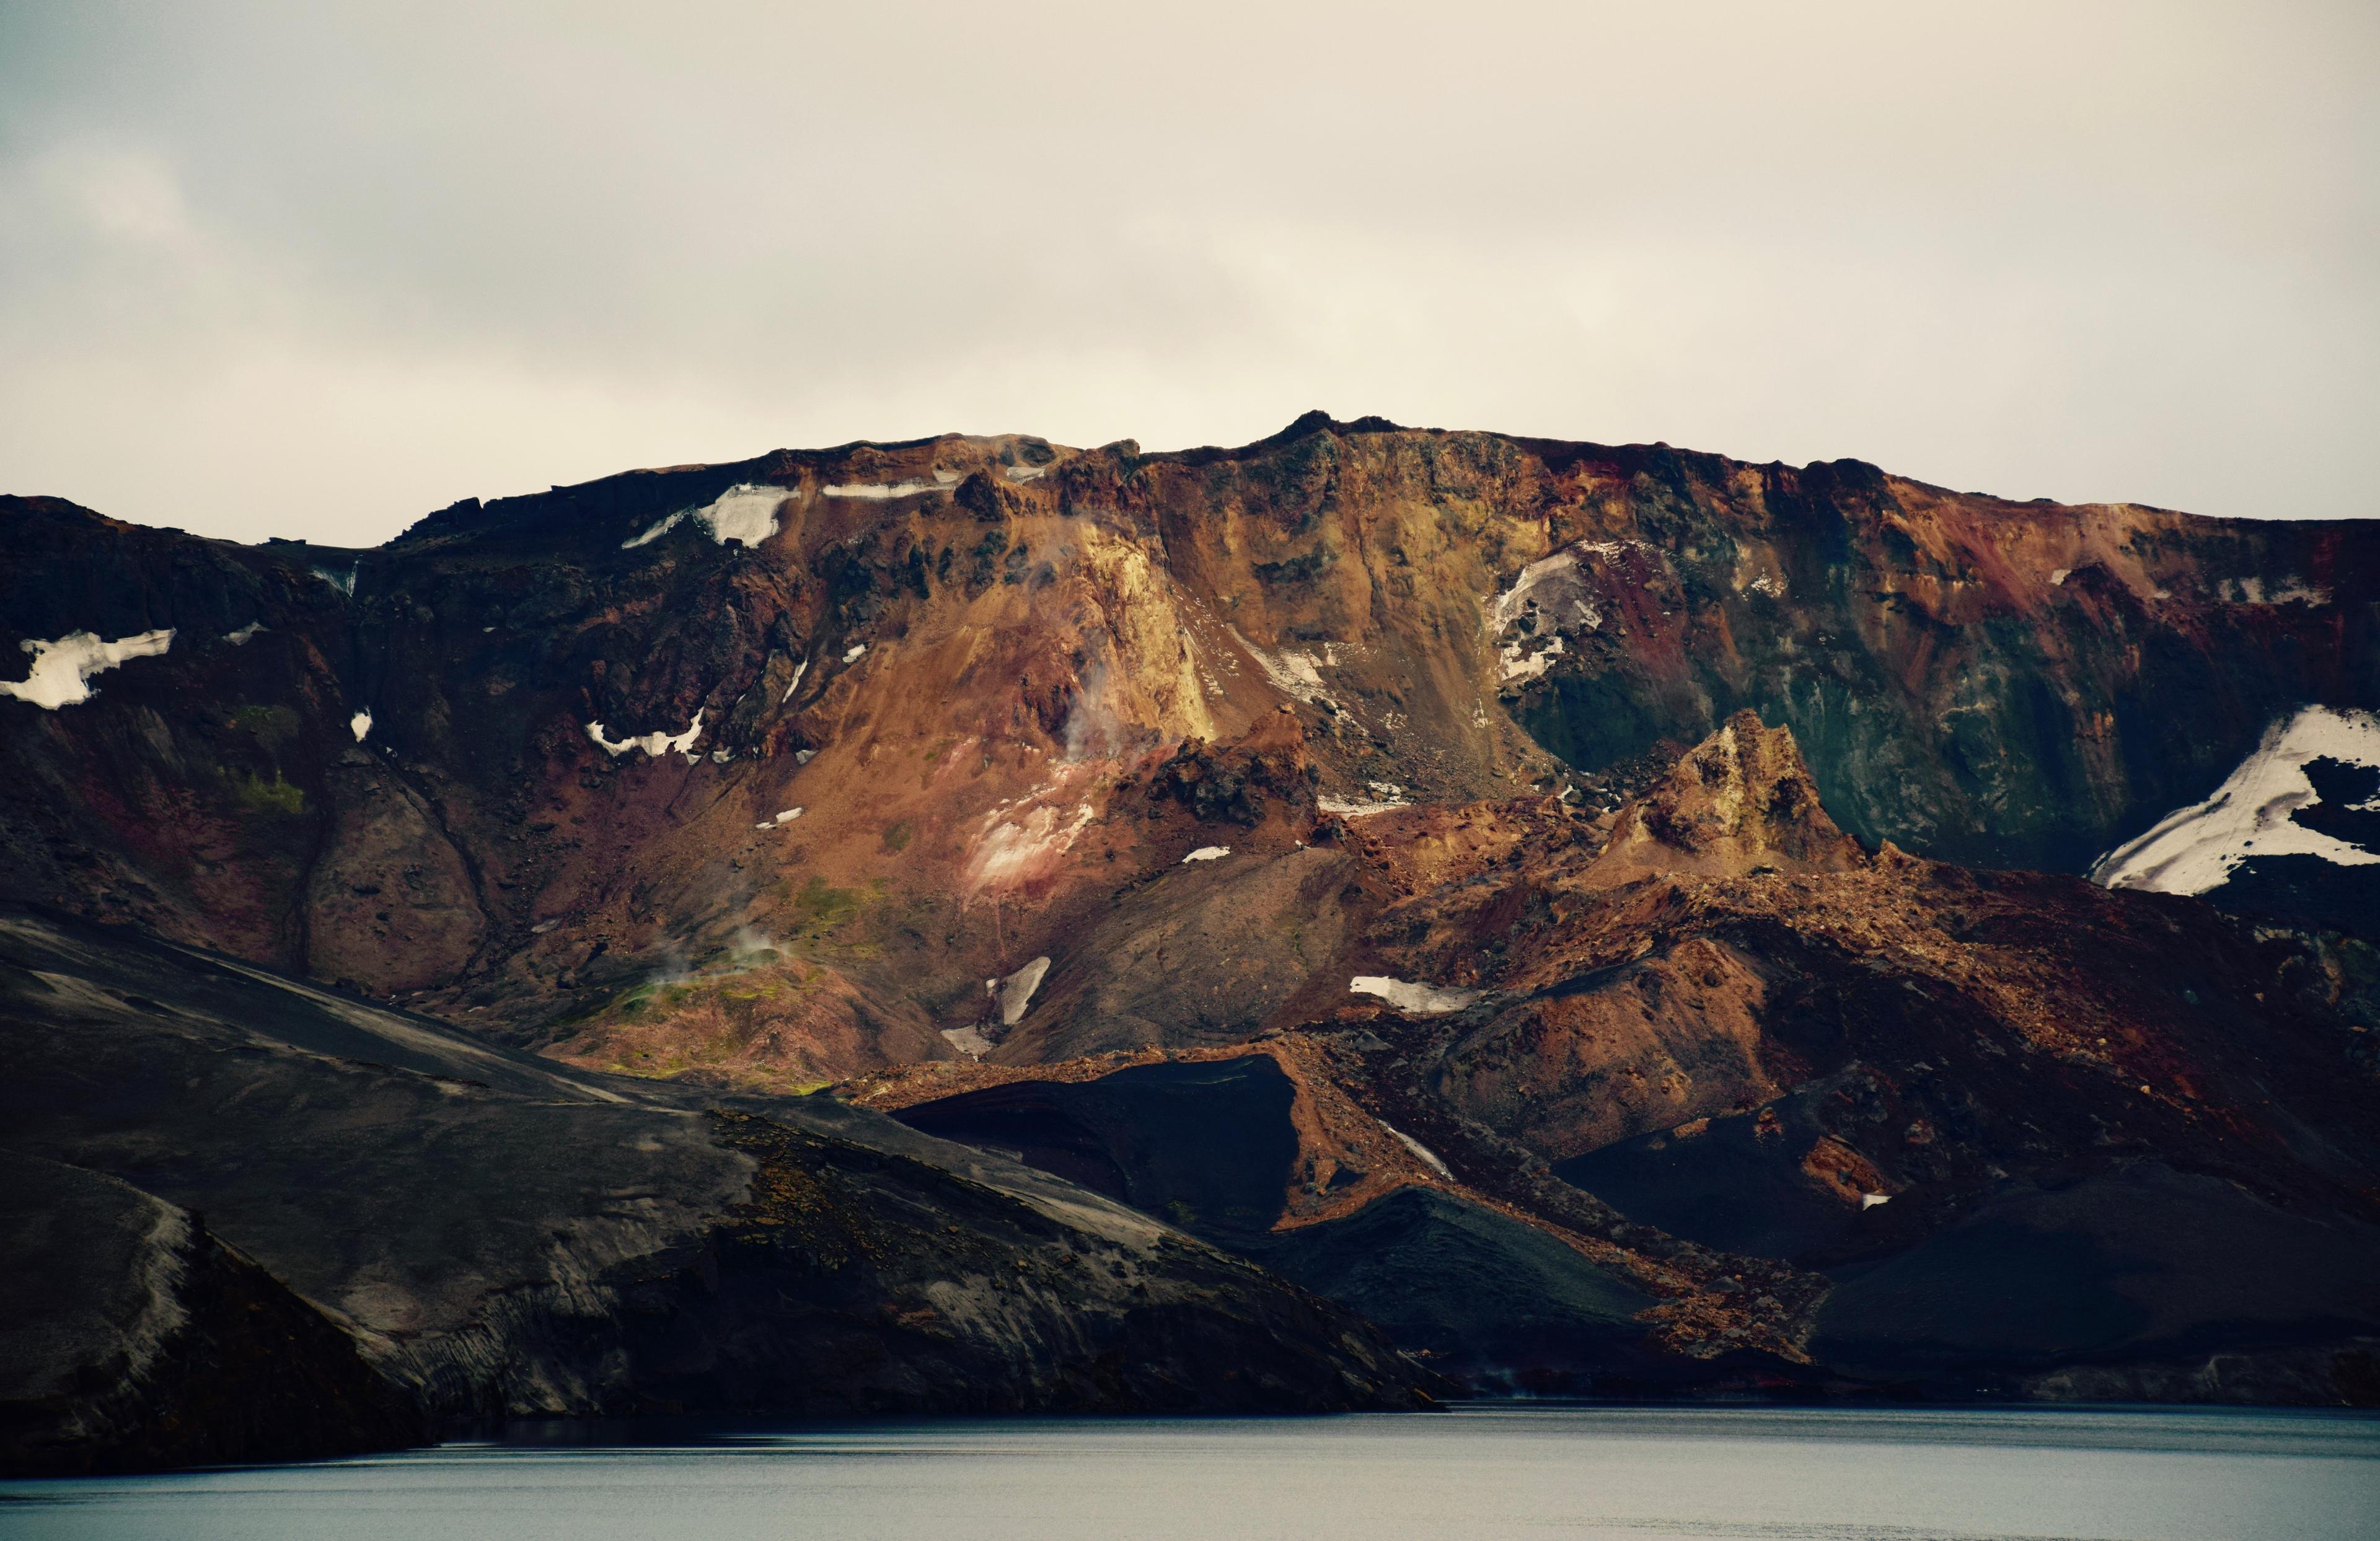 Mountain formations around the Askja crater.